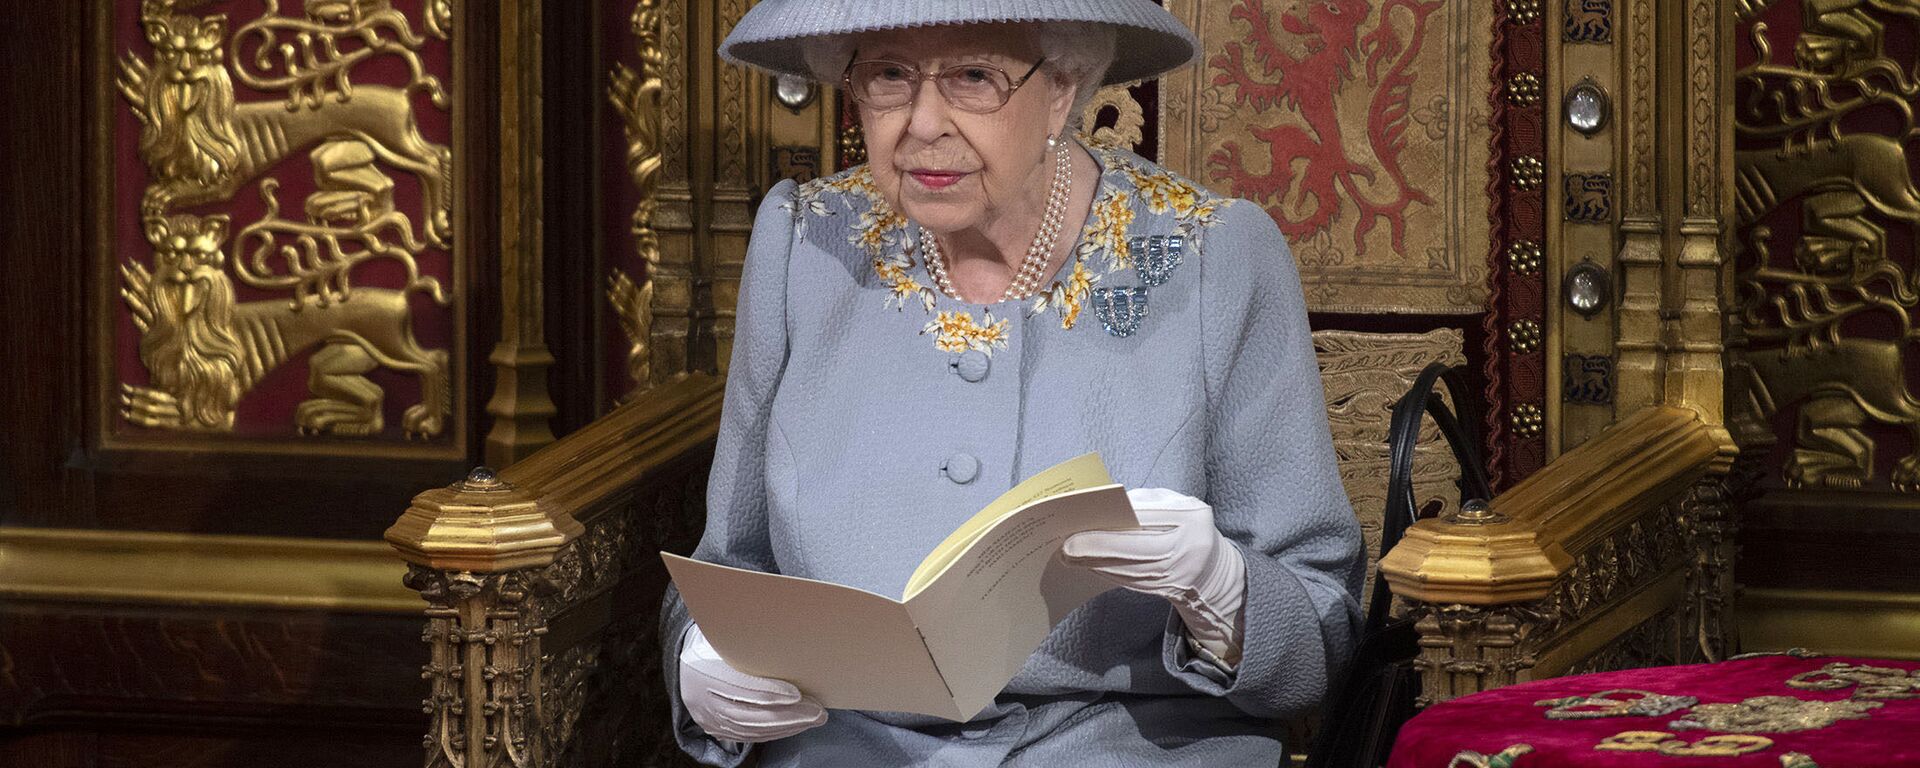 Britain's Queen Elizabeth II delivers the speech in the House of Lords during the State Opening of Parliament at the Palace of Westminster in London, Tuesday May 11, 2021. (Eddie Mulholland/Pool via AP) - Sputnik International, 1920, 10.09.2021